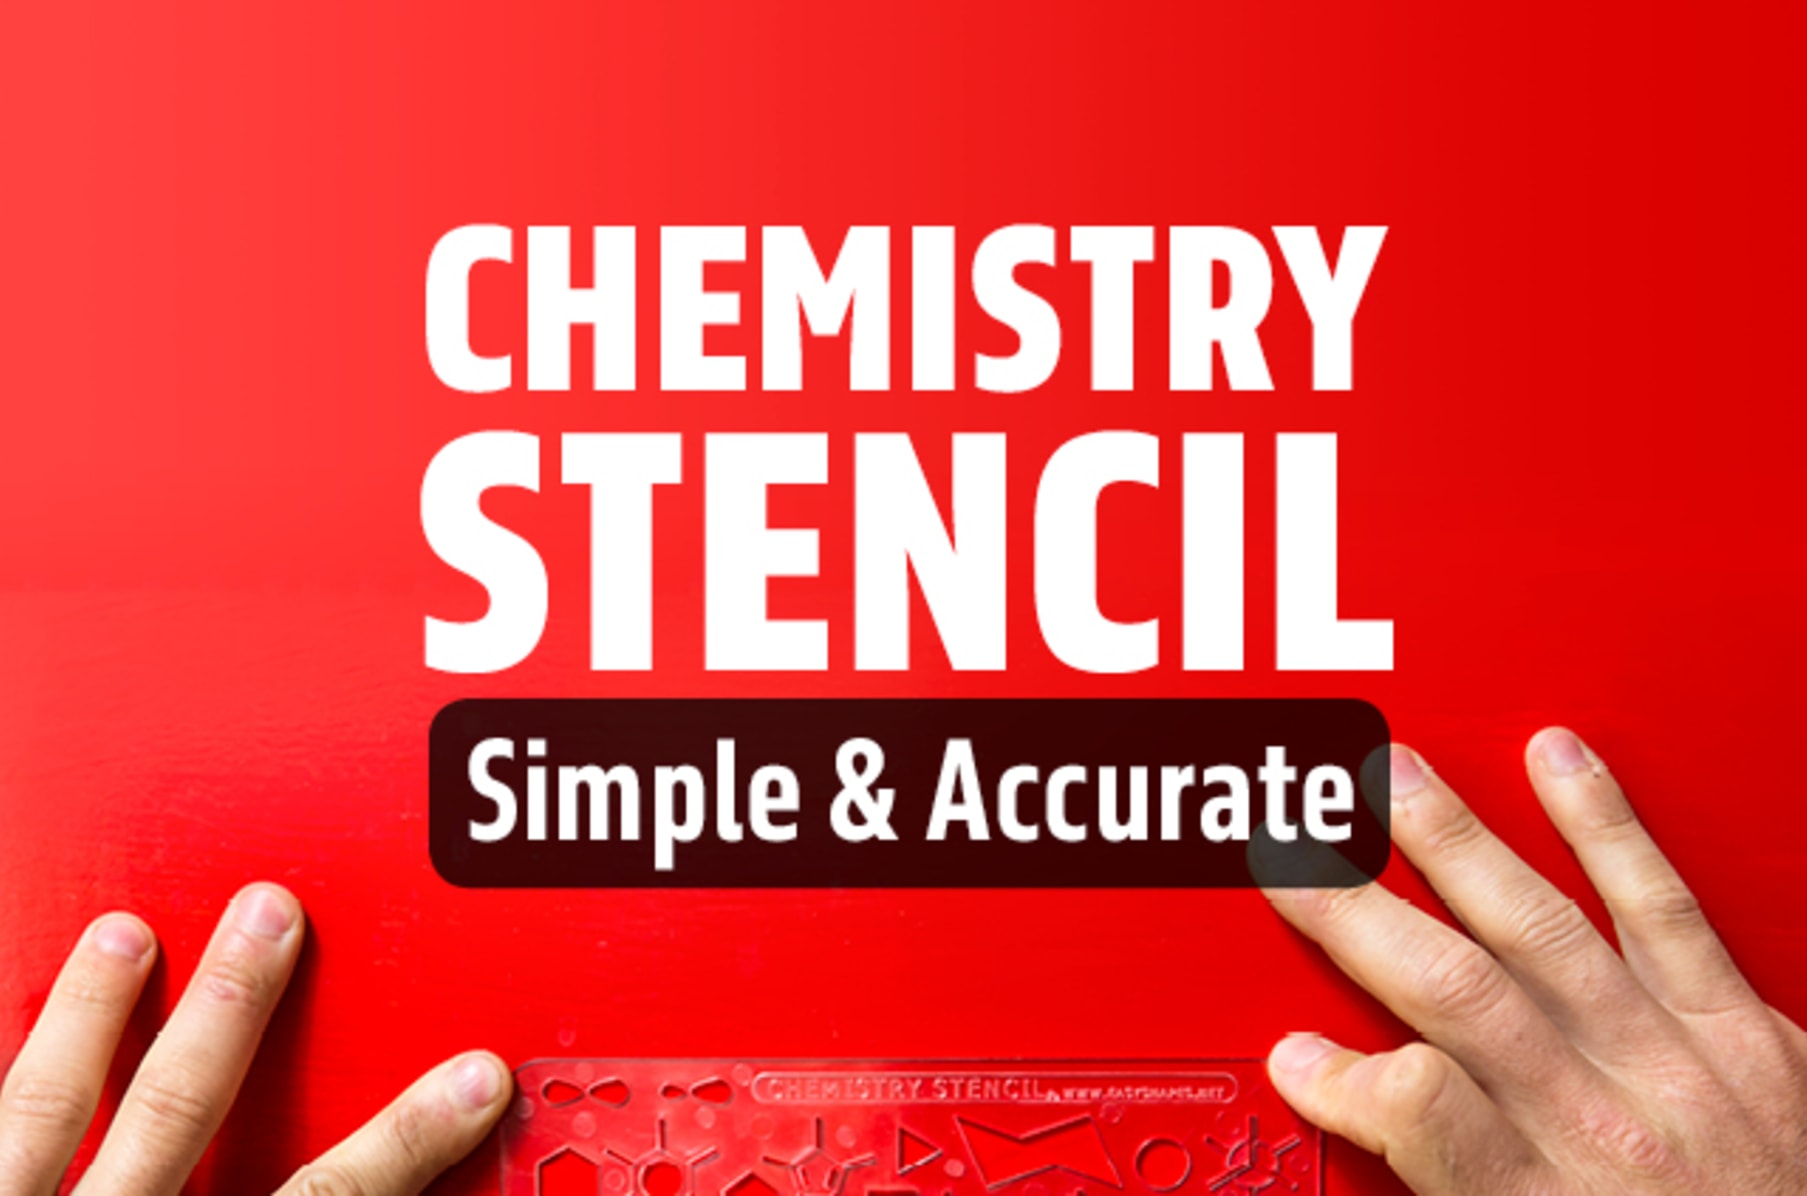 Easyshapes: Organic Chemistry Stencil Drawing & Drafting Template.